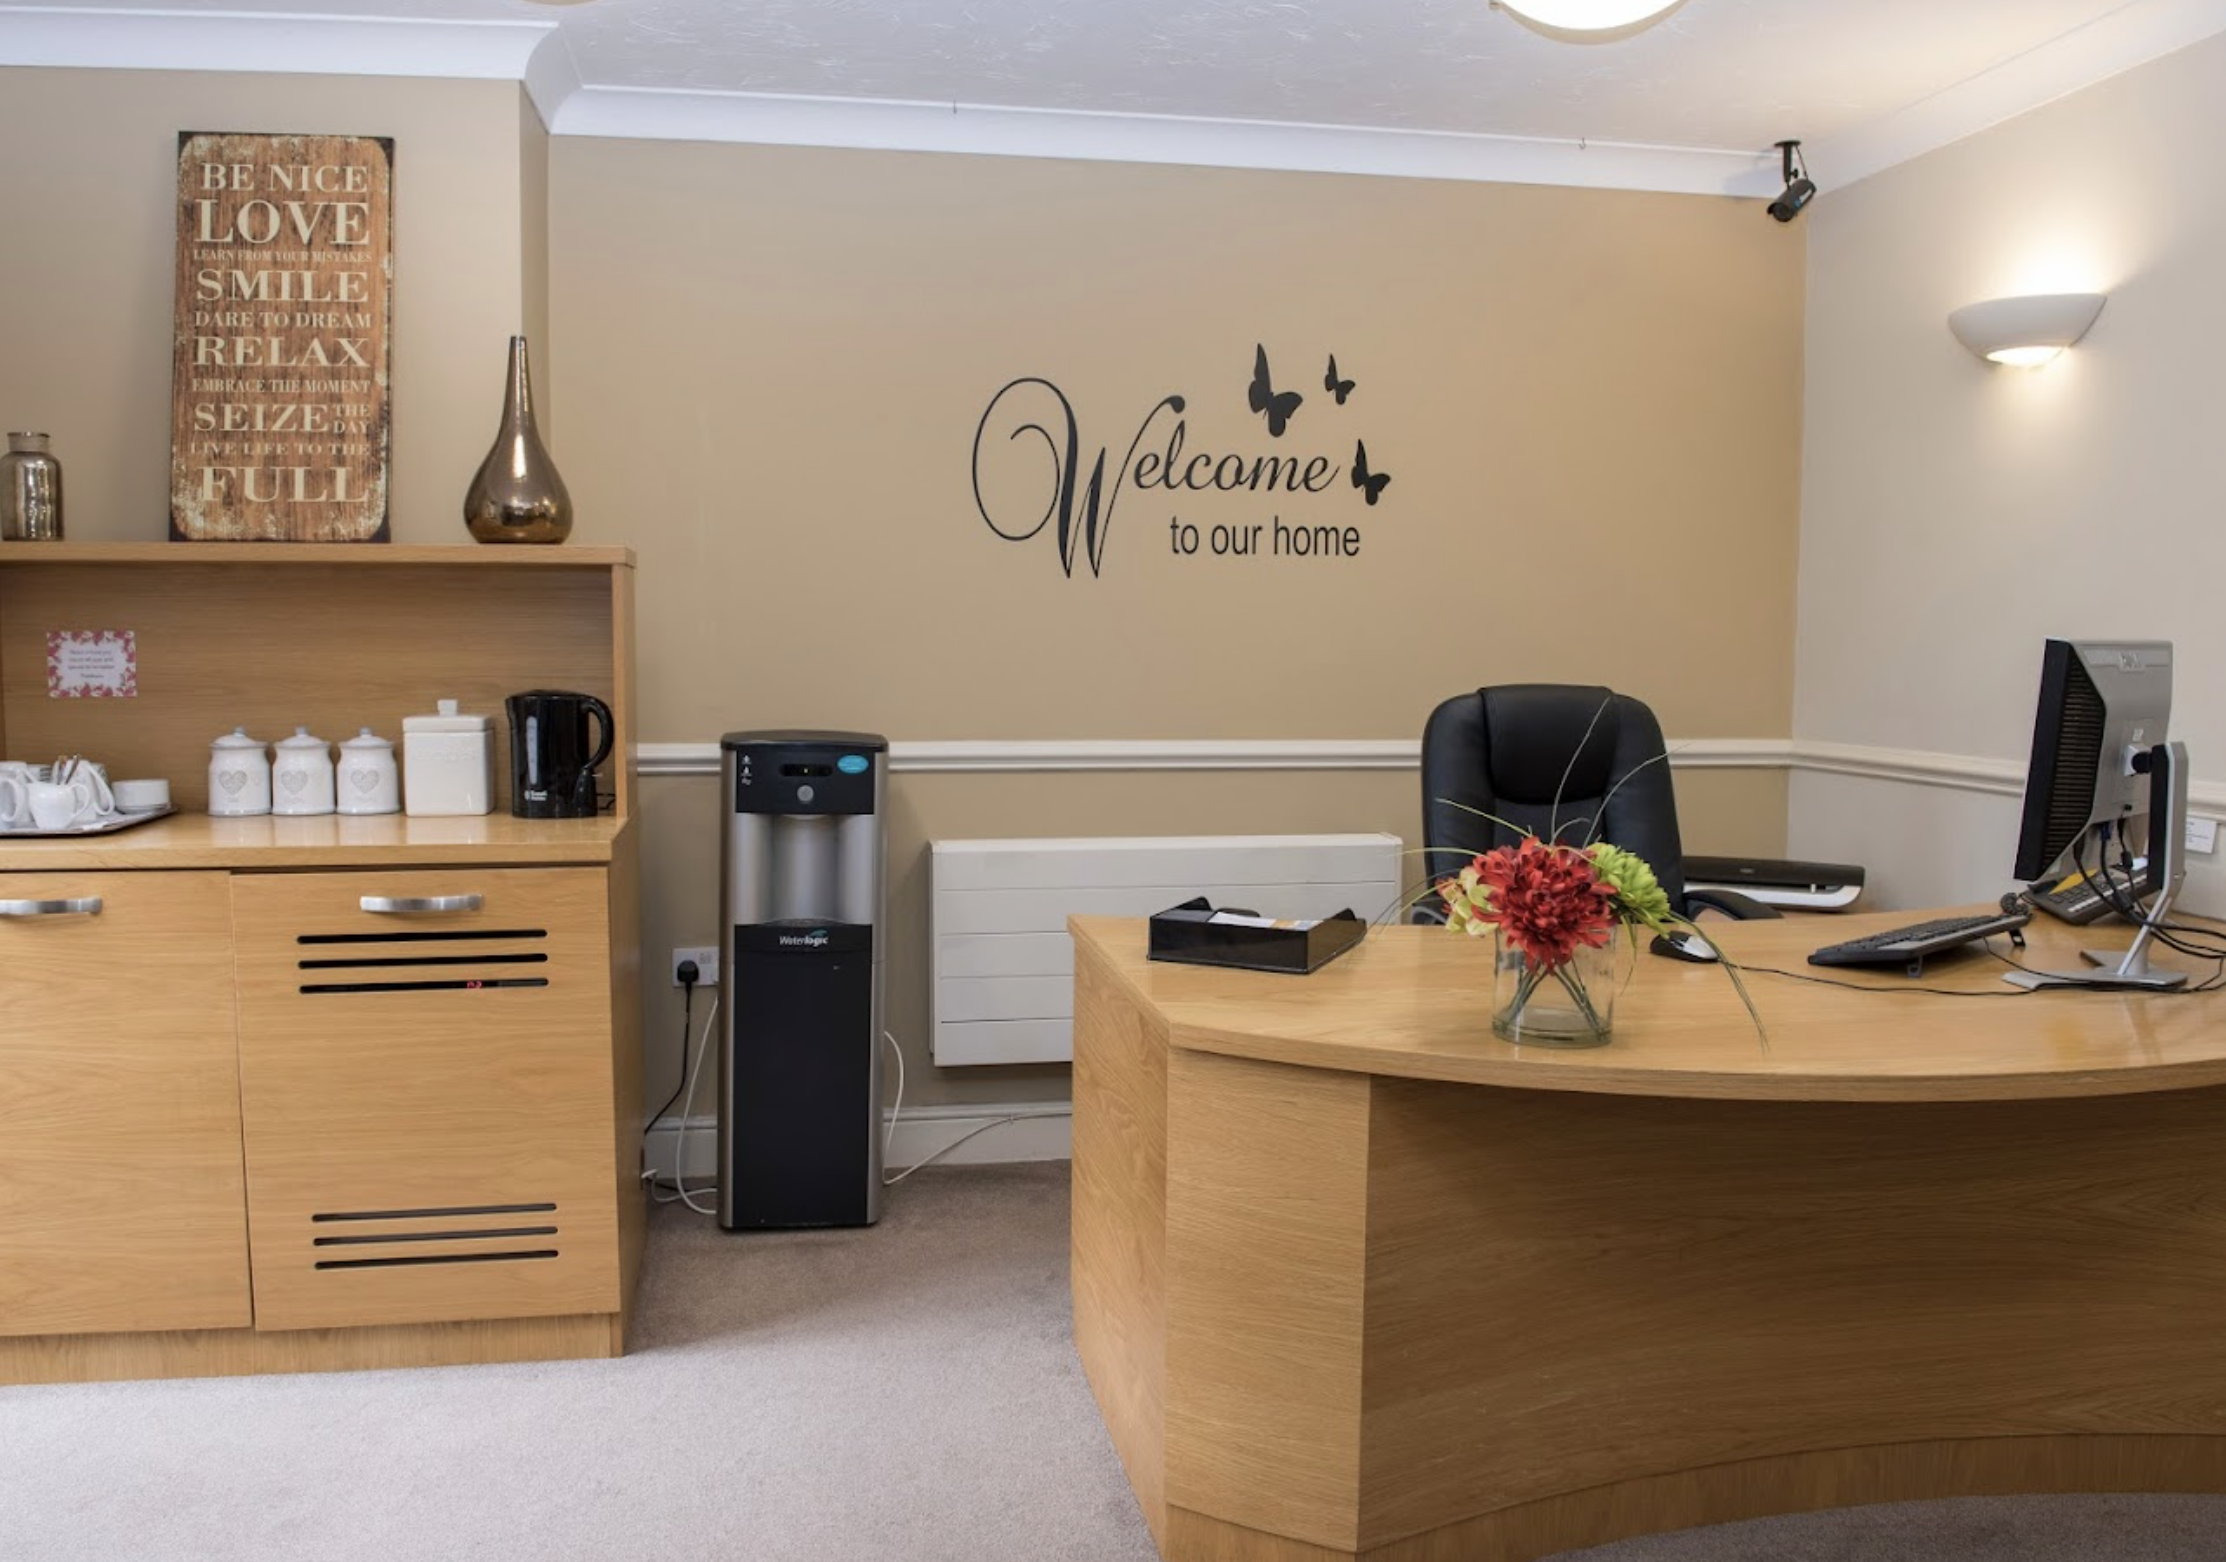 Reception of The Sidcup care home in Sidcup, Kent